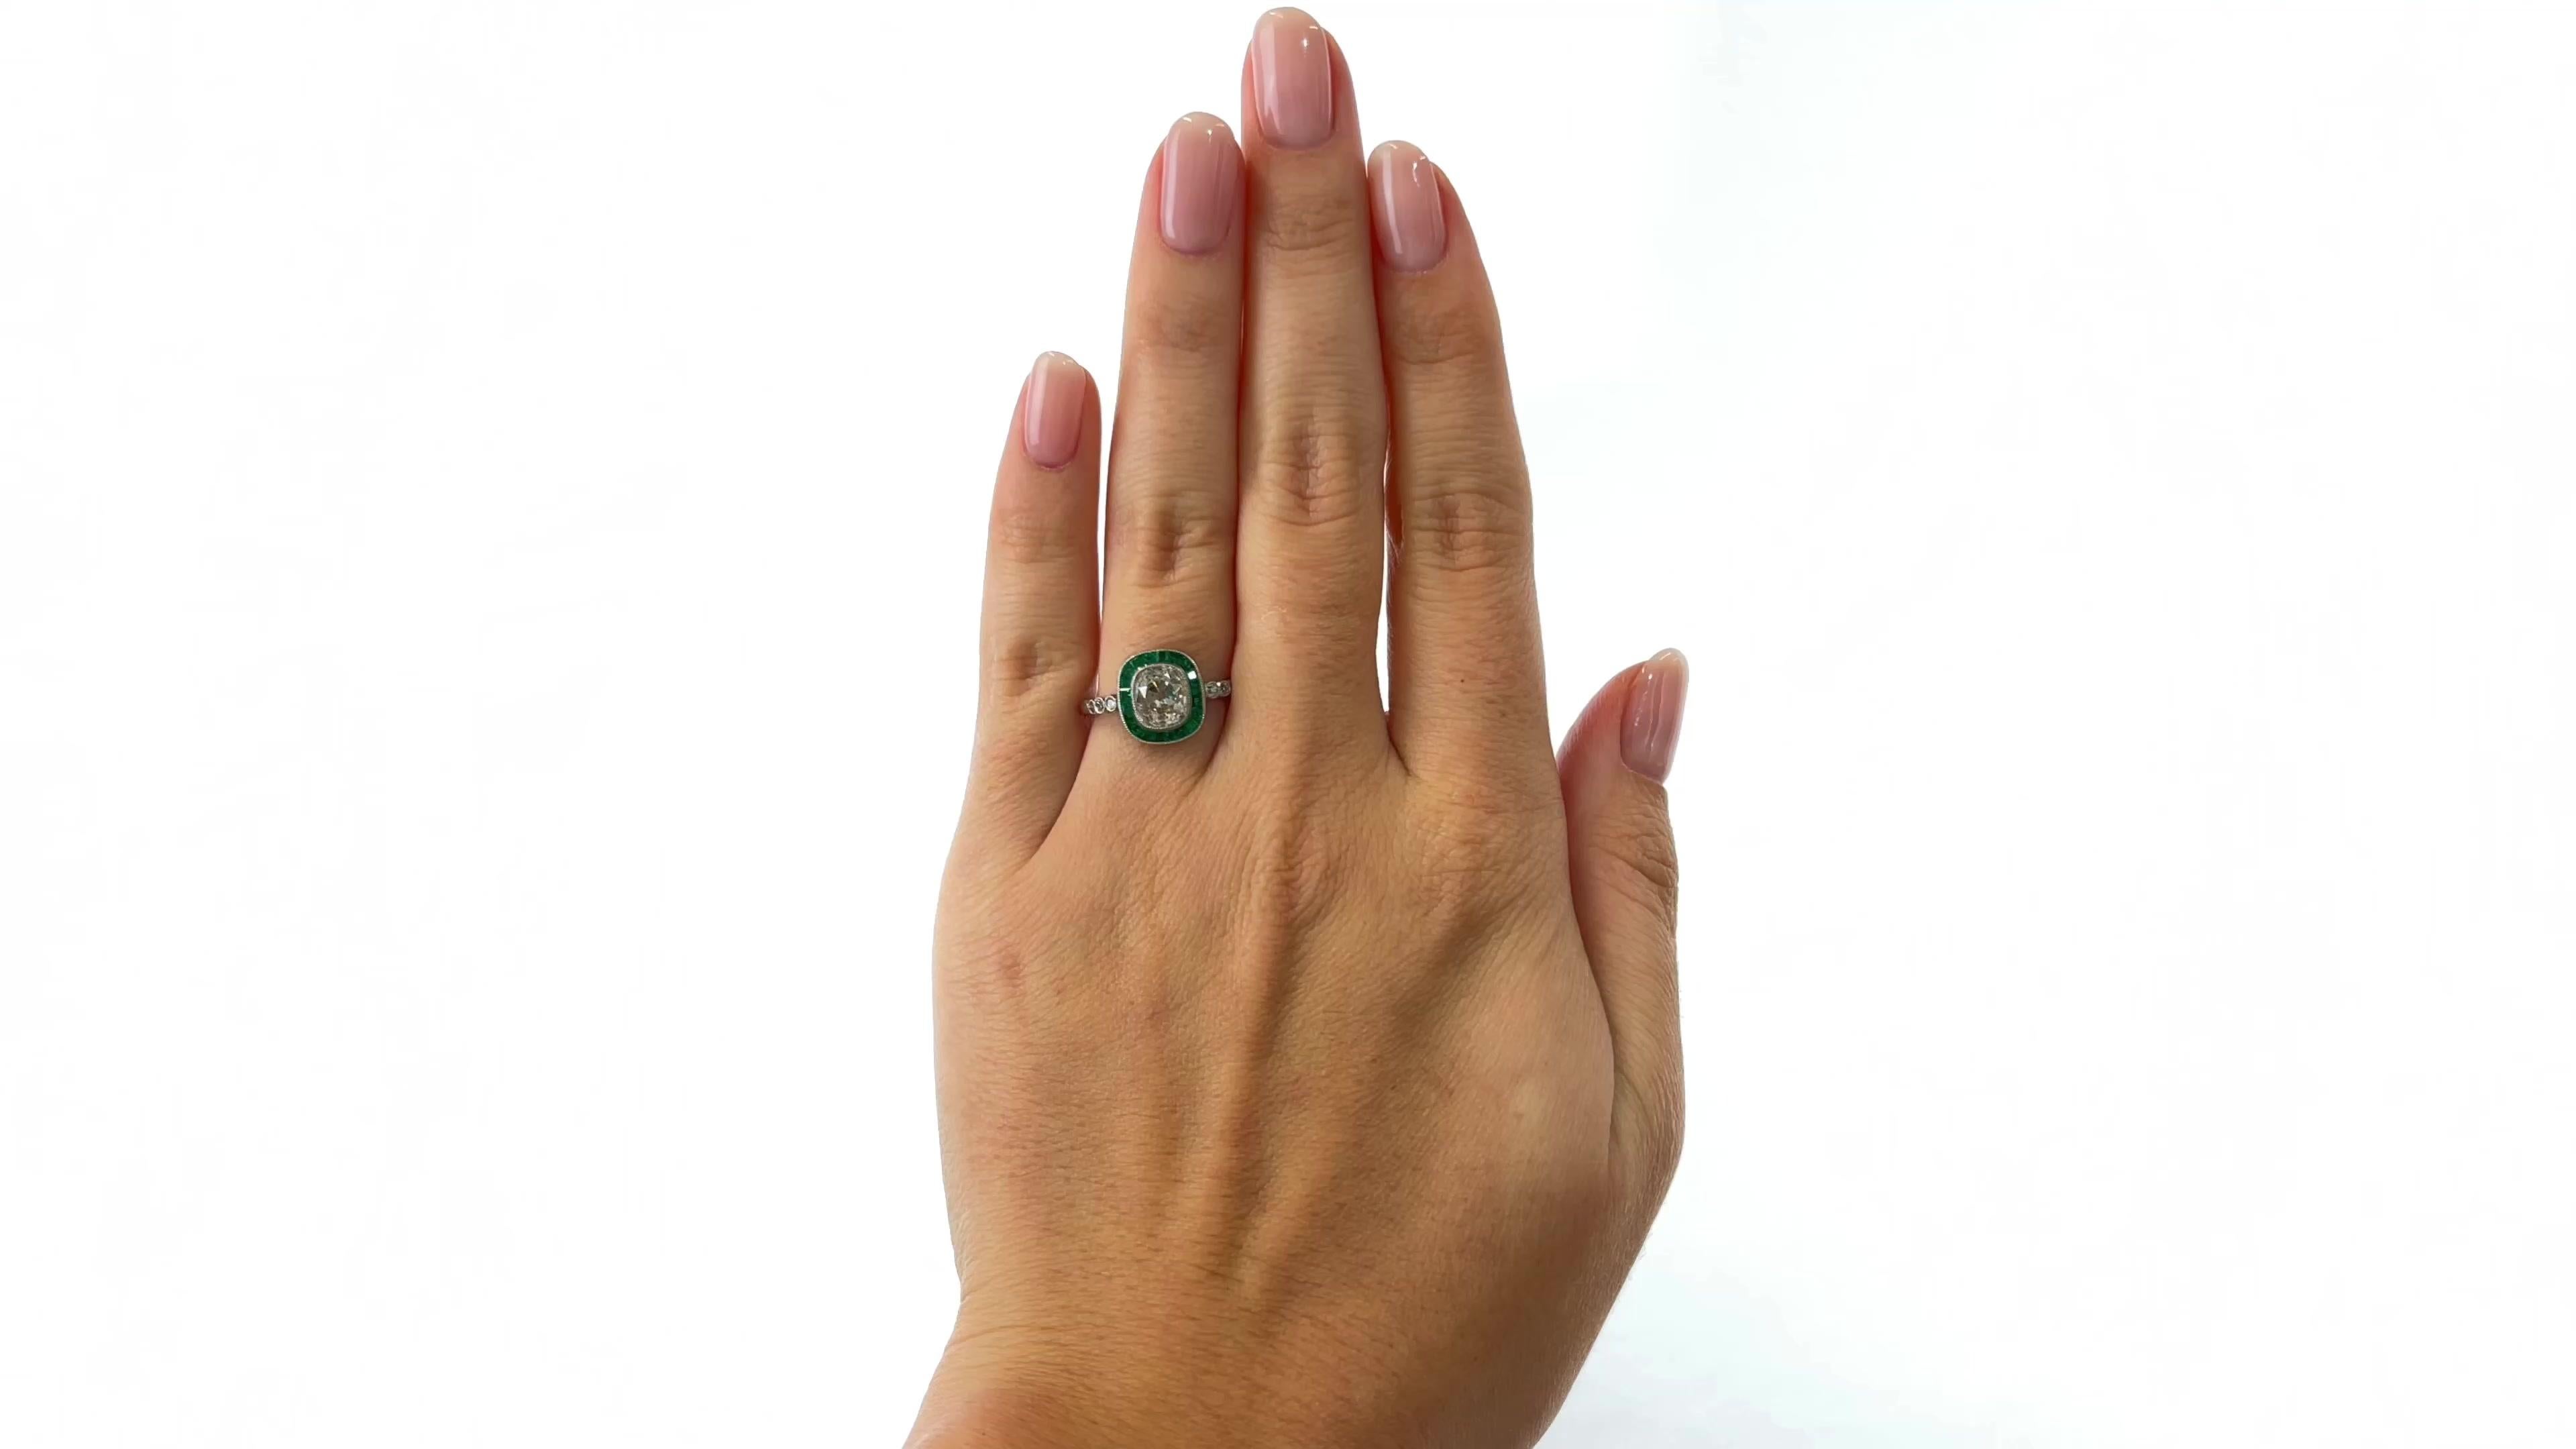 One Art Deco Inspired 1.62 Carat Old Mine Cut Diamond Emerald Platinum Engagement Ring. Featuring one 1.62 carat old mine cut diamond, graded L color, VS2 clarity. Accented by 20 calibré cut emeralds with a total weight of approximately 0.40 carats,